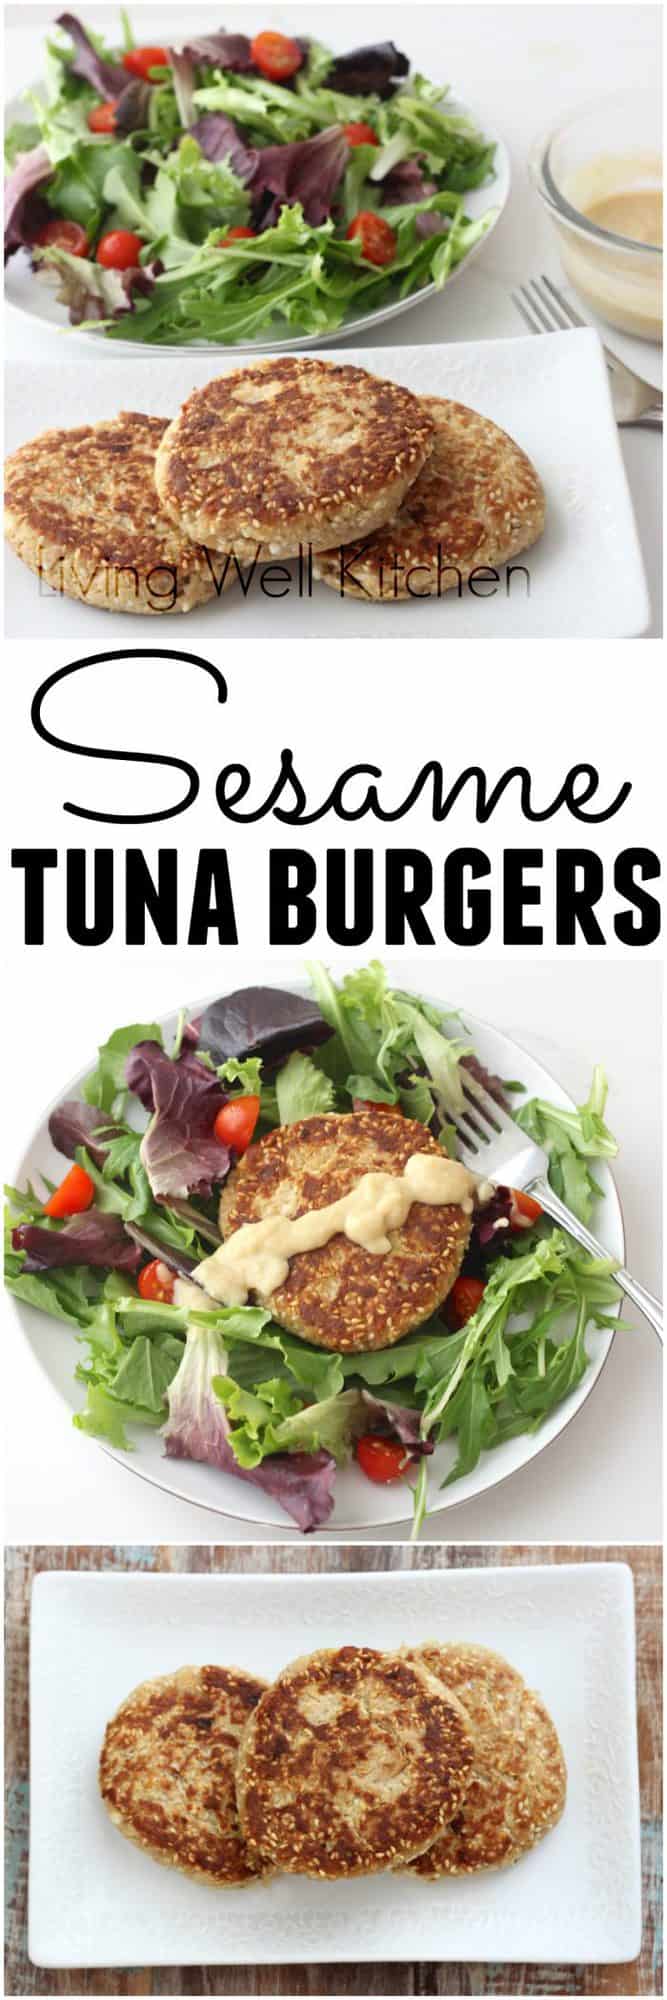 Sesame Tuna Burgers turn boring canned tuna into a delicious meal that nourishes your body from @memeinge